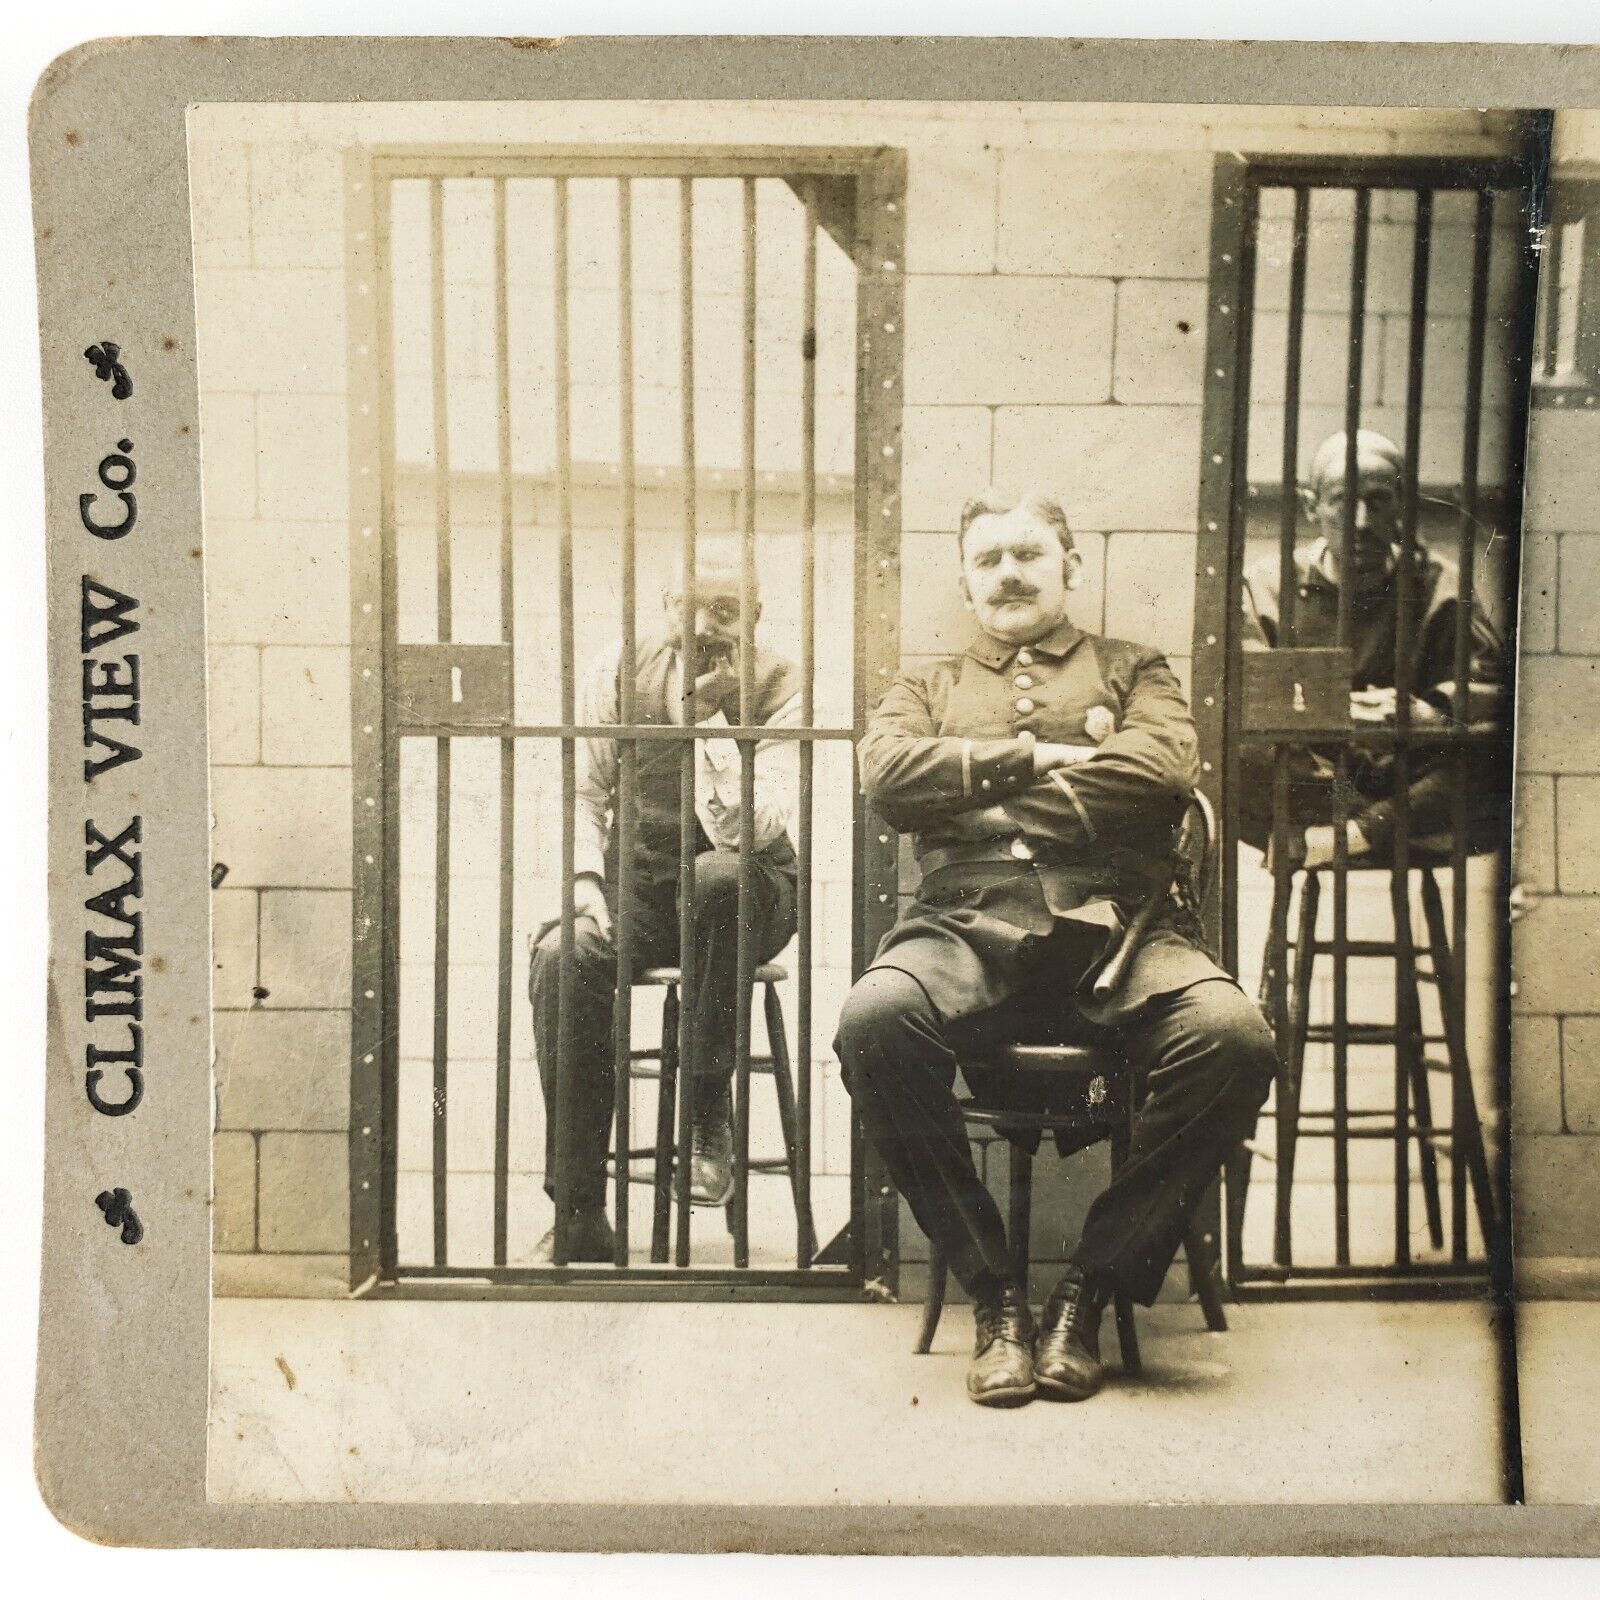 Police Officer Prison Guard Stereoview c1900 Jail Cell Cop Prisoners Photo A2676